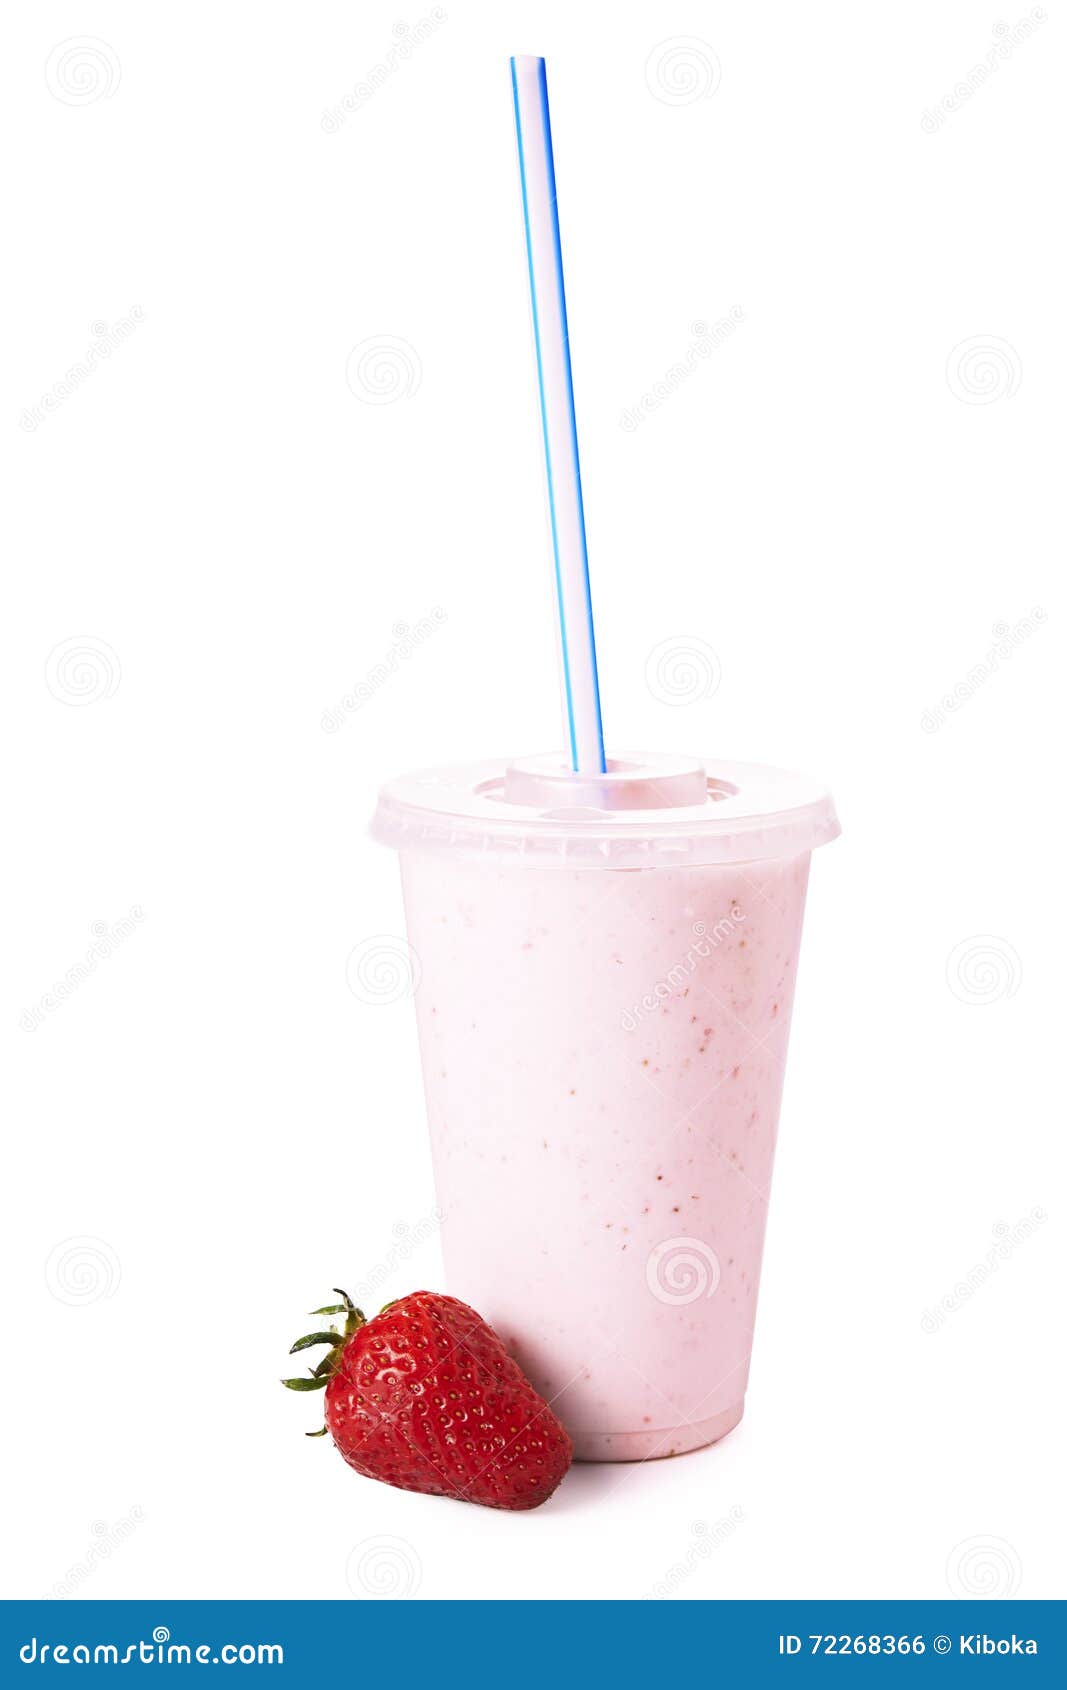 Strawberry Milkshake With Cream And Sauce In Take Away Cup Stock Photo,  Picture and Royalty Free Image. Image 58508331.